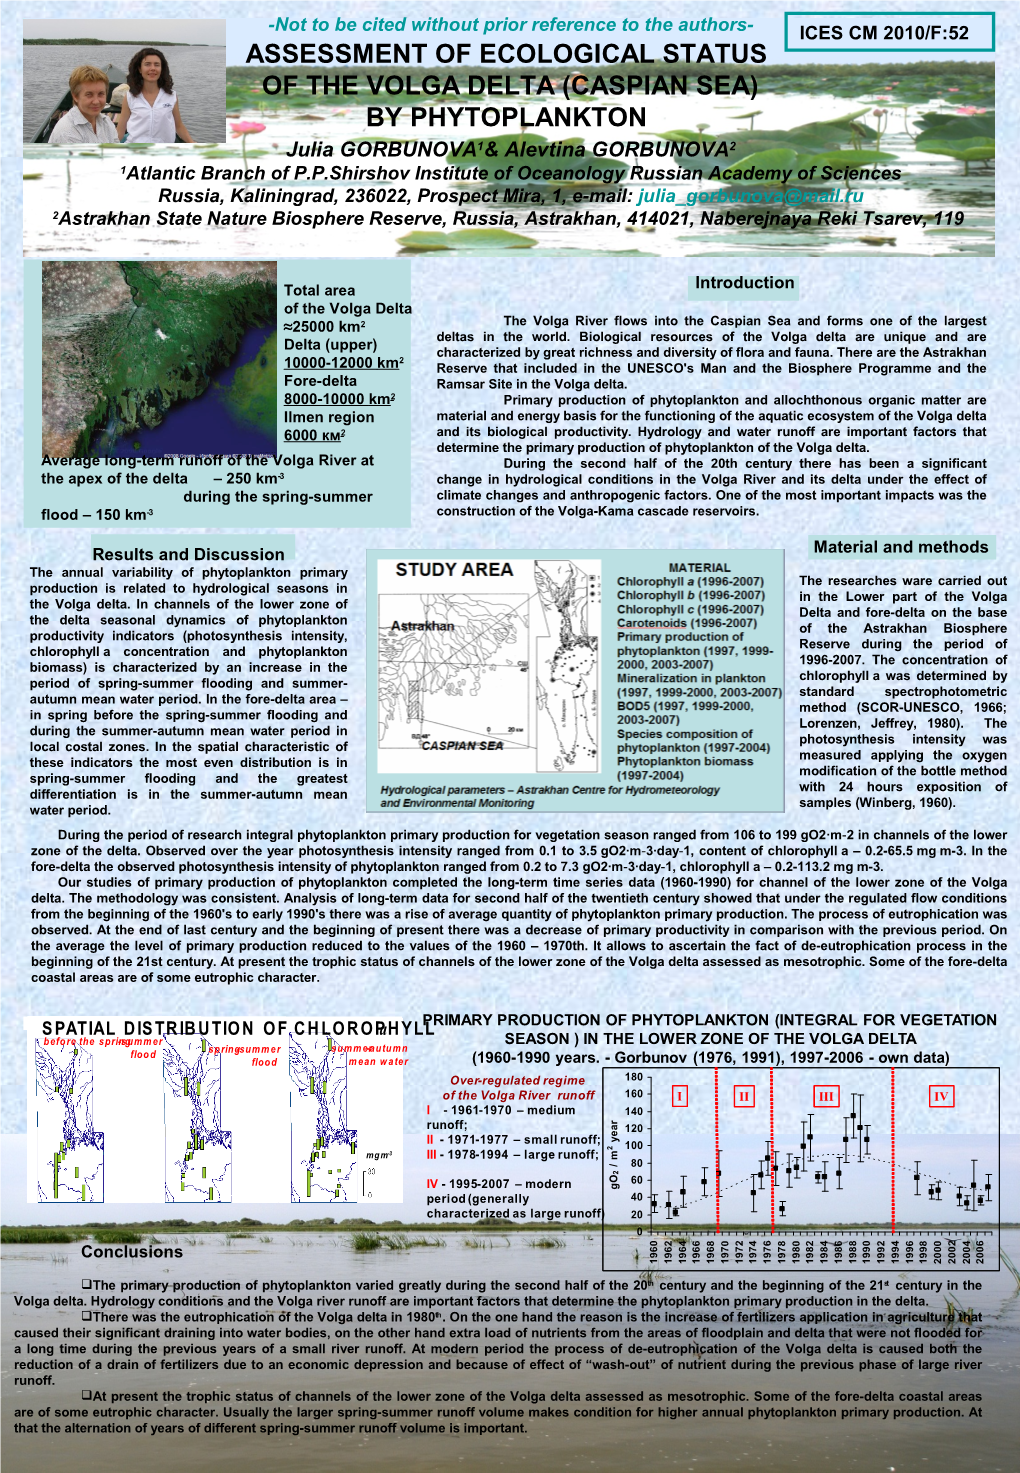 Assessment of Ecological Status of the Volga Delta (Caspian Sea) by Phytoplankton. ICES CM 2010/ F:52